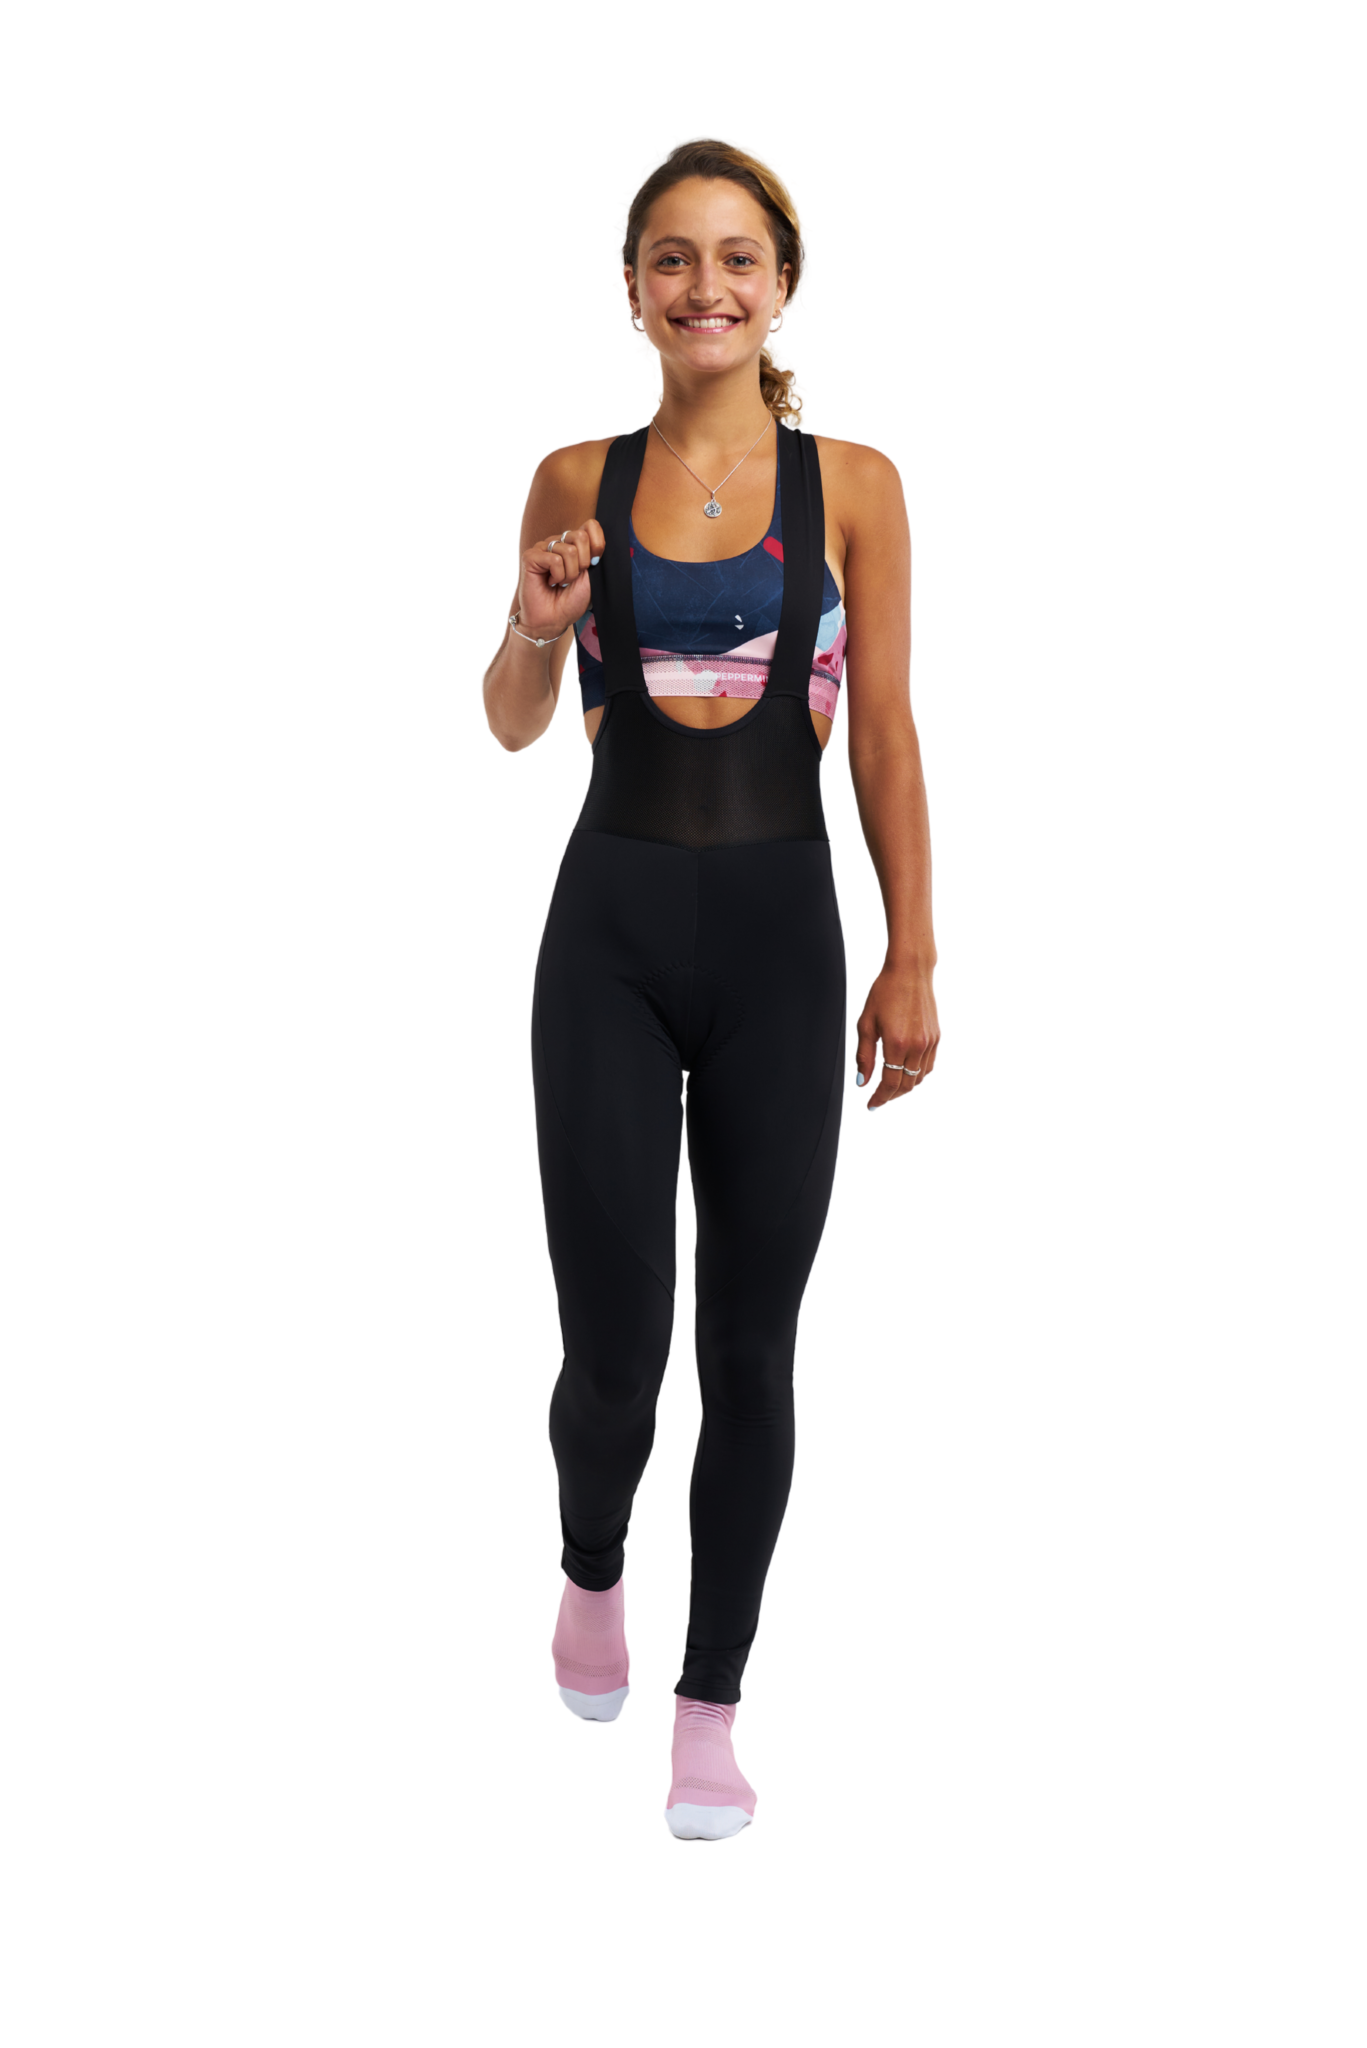 Peppermint Thermal Bib Tights Women's - Parry Sound Bikes